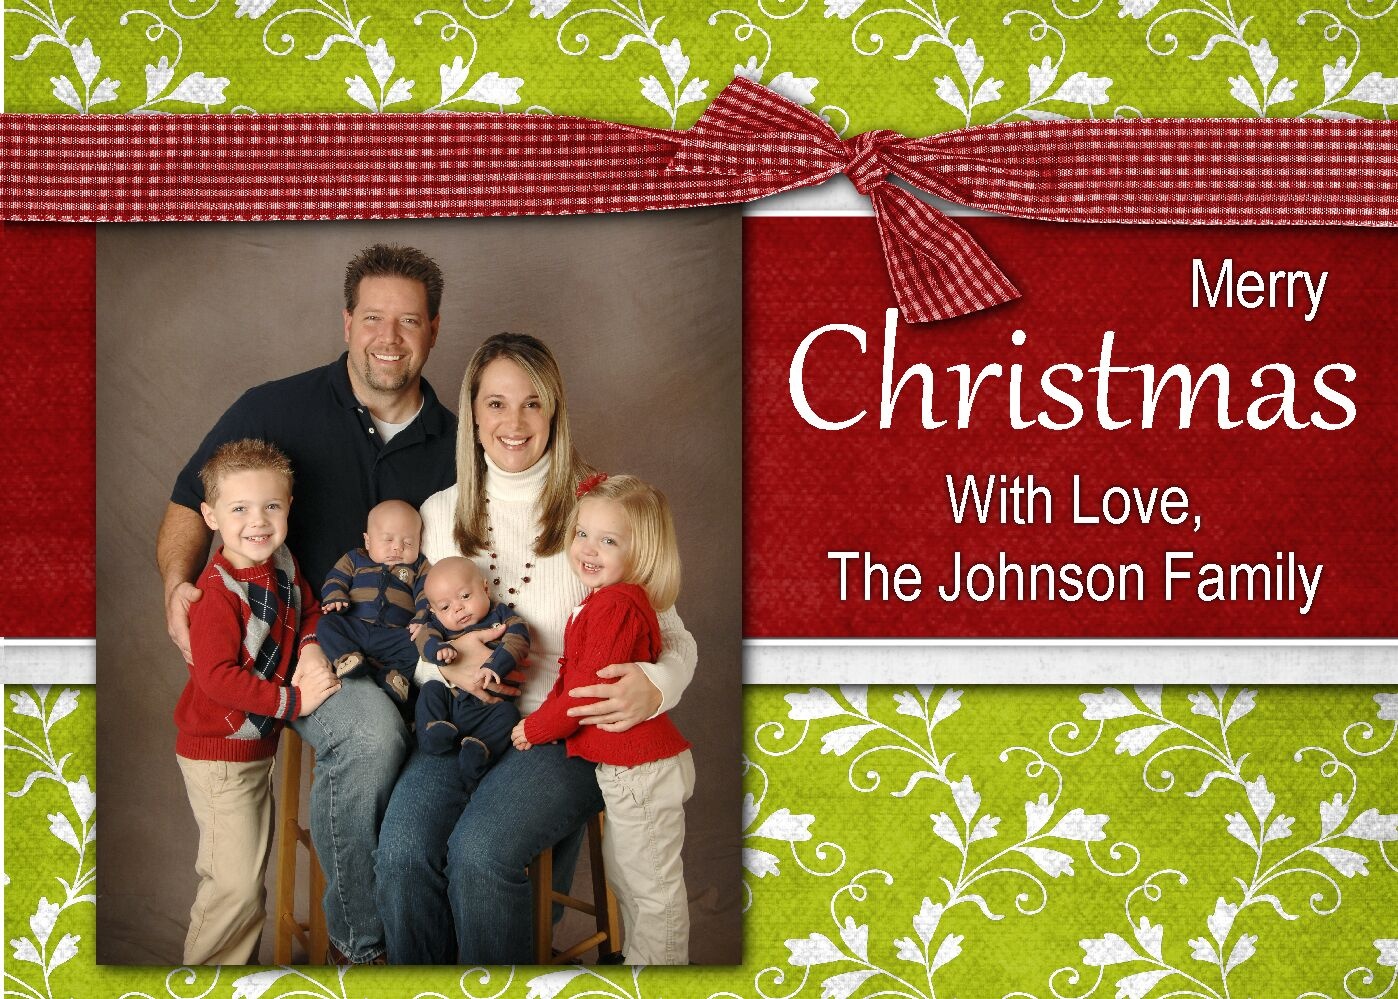 Free Christmas Cards To Make - Demir.iso-Consulting.co - Free Online Christmas Photo Card Maker Printable